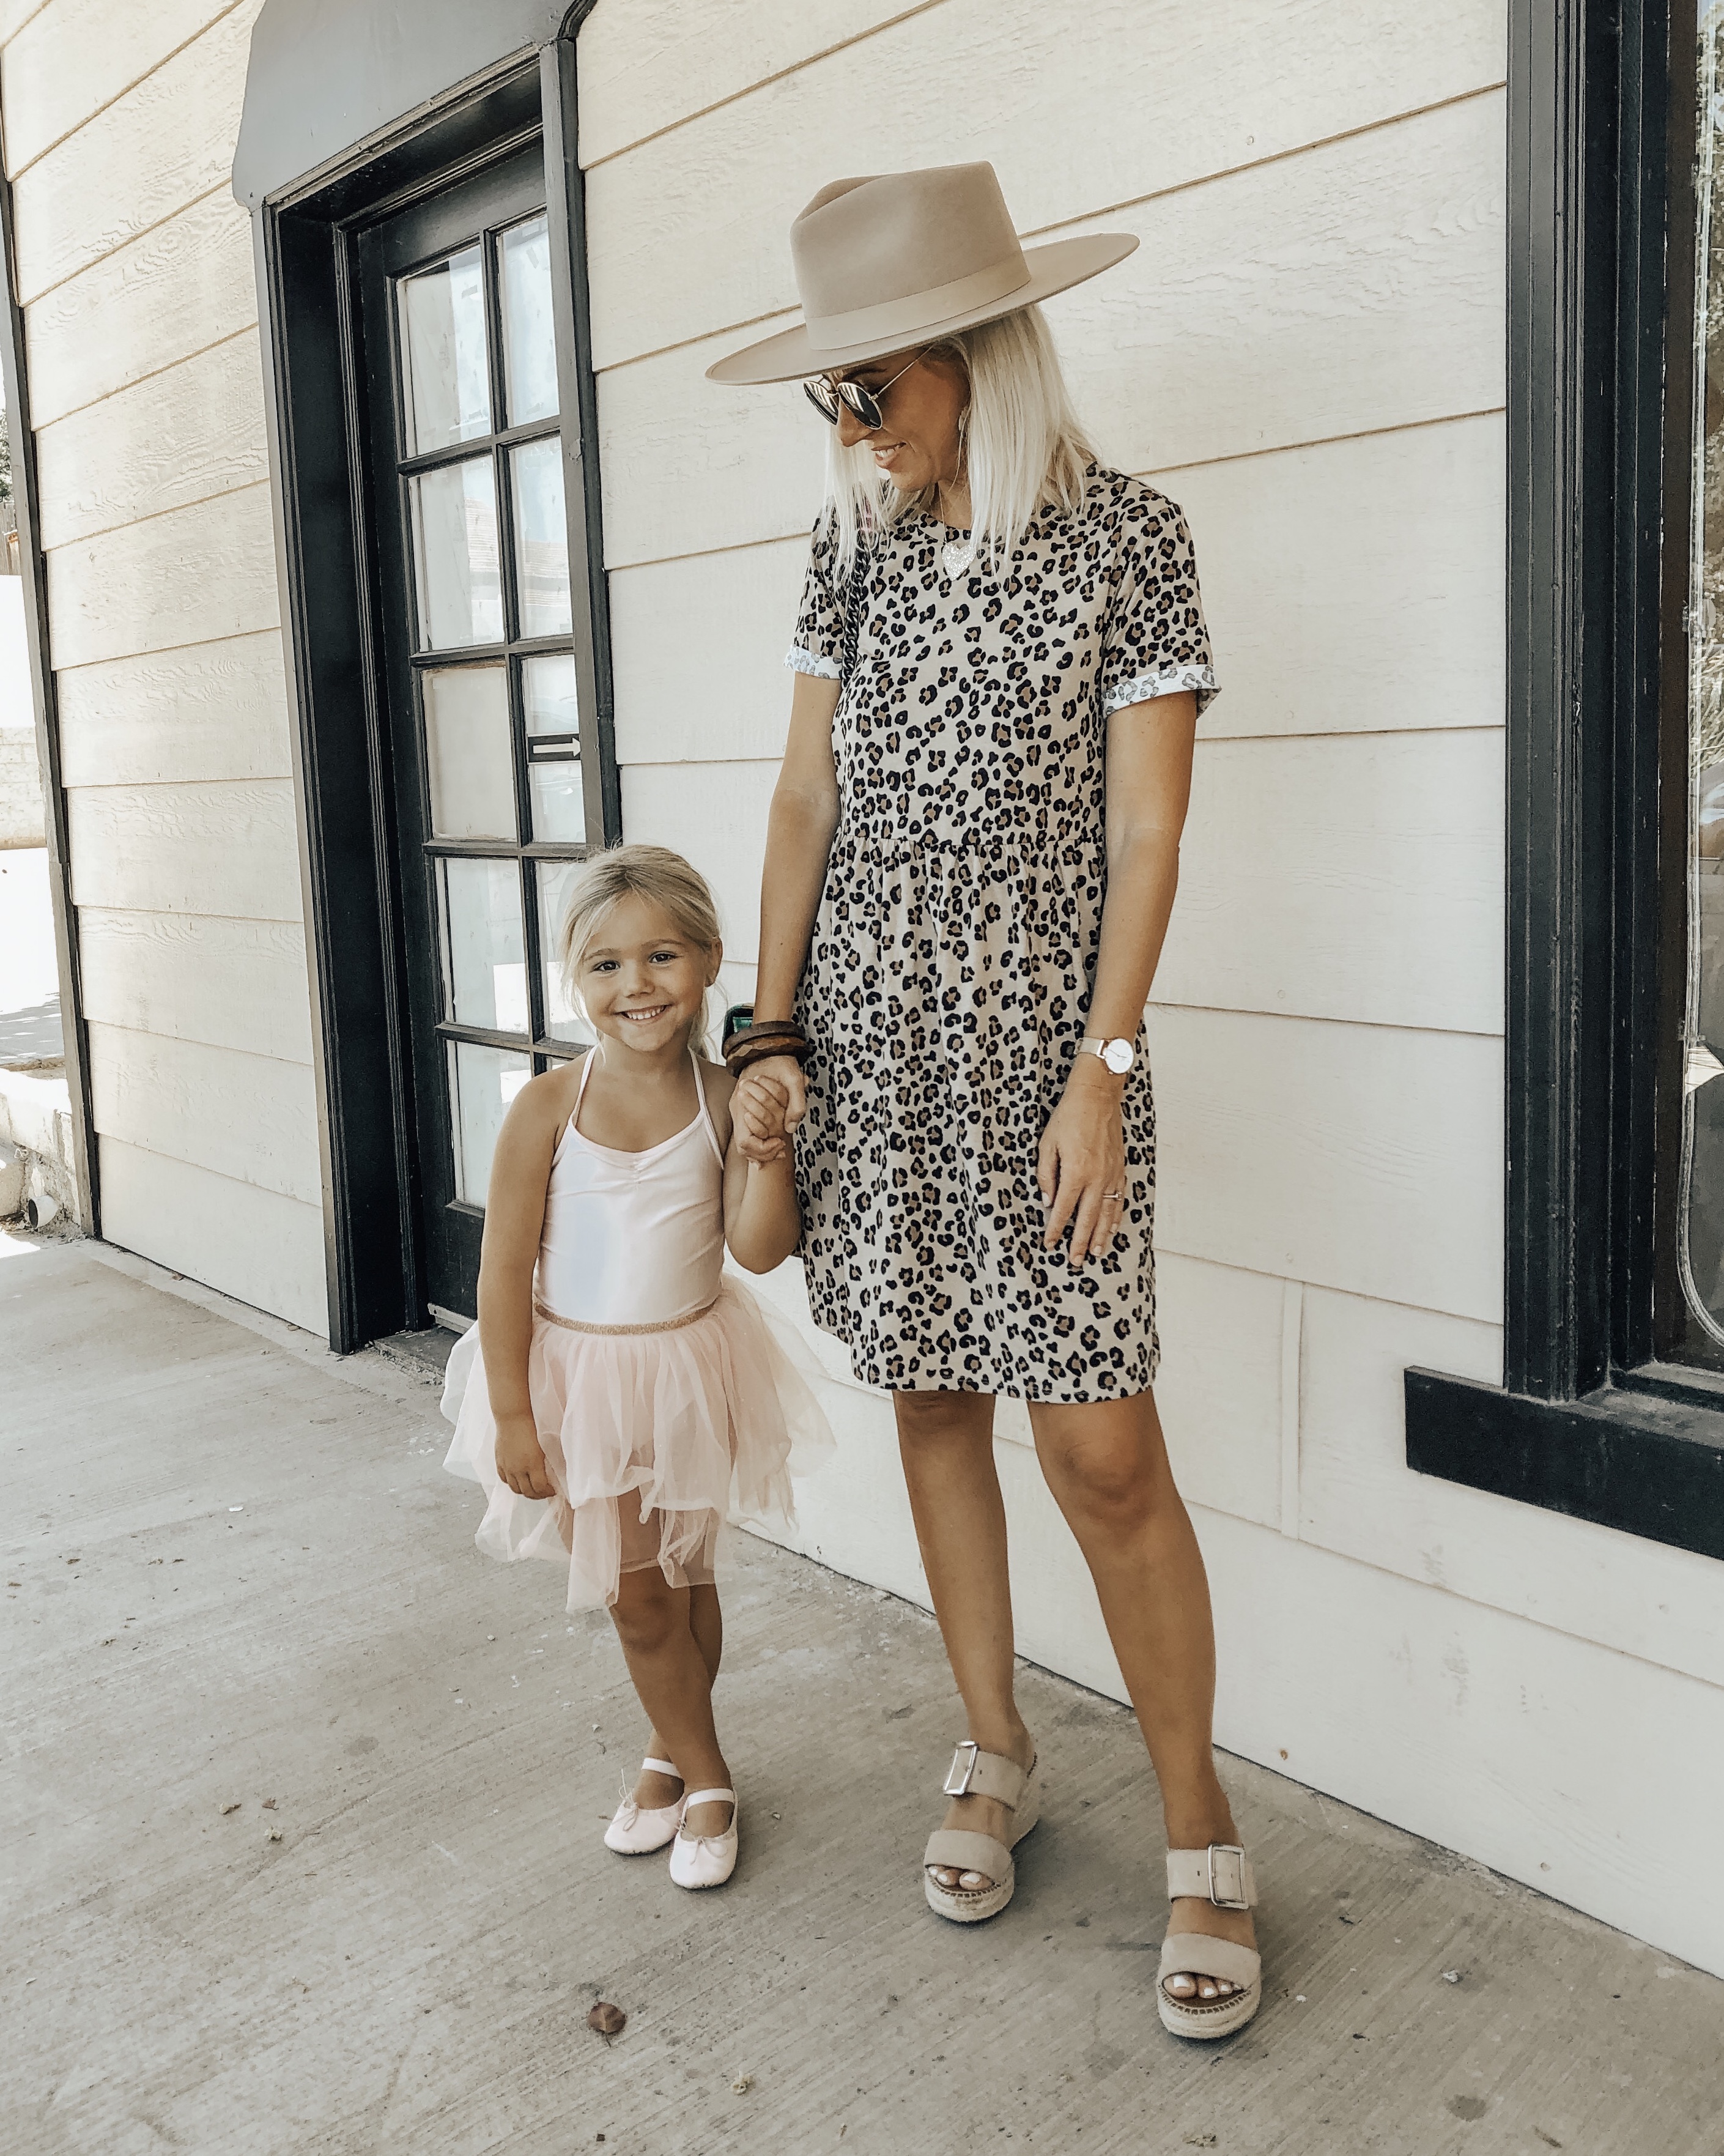 ALL ABOUT ANIMAL PRINT- Jaclyn De Leon Style= The animal print trend is everywhere right now and now heading into the Fall it's not going anywhere. Leopard print, cheetah, zebra and more on clothing, accessories and shoes.